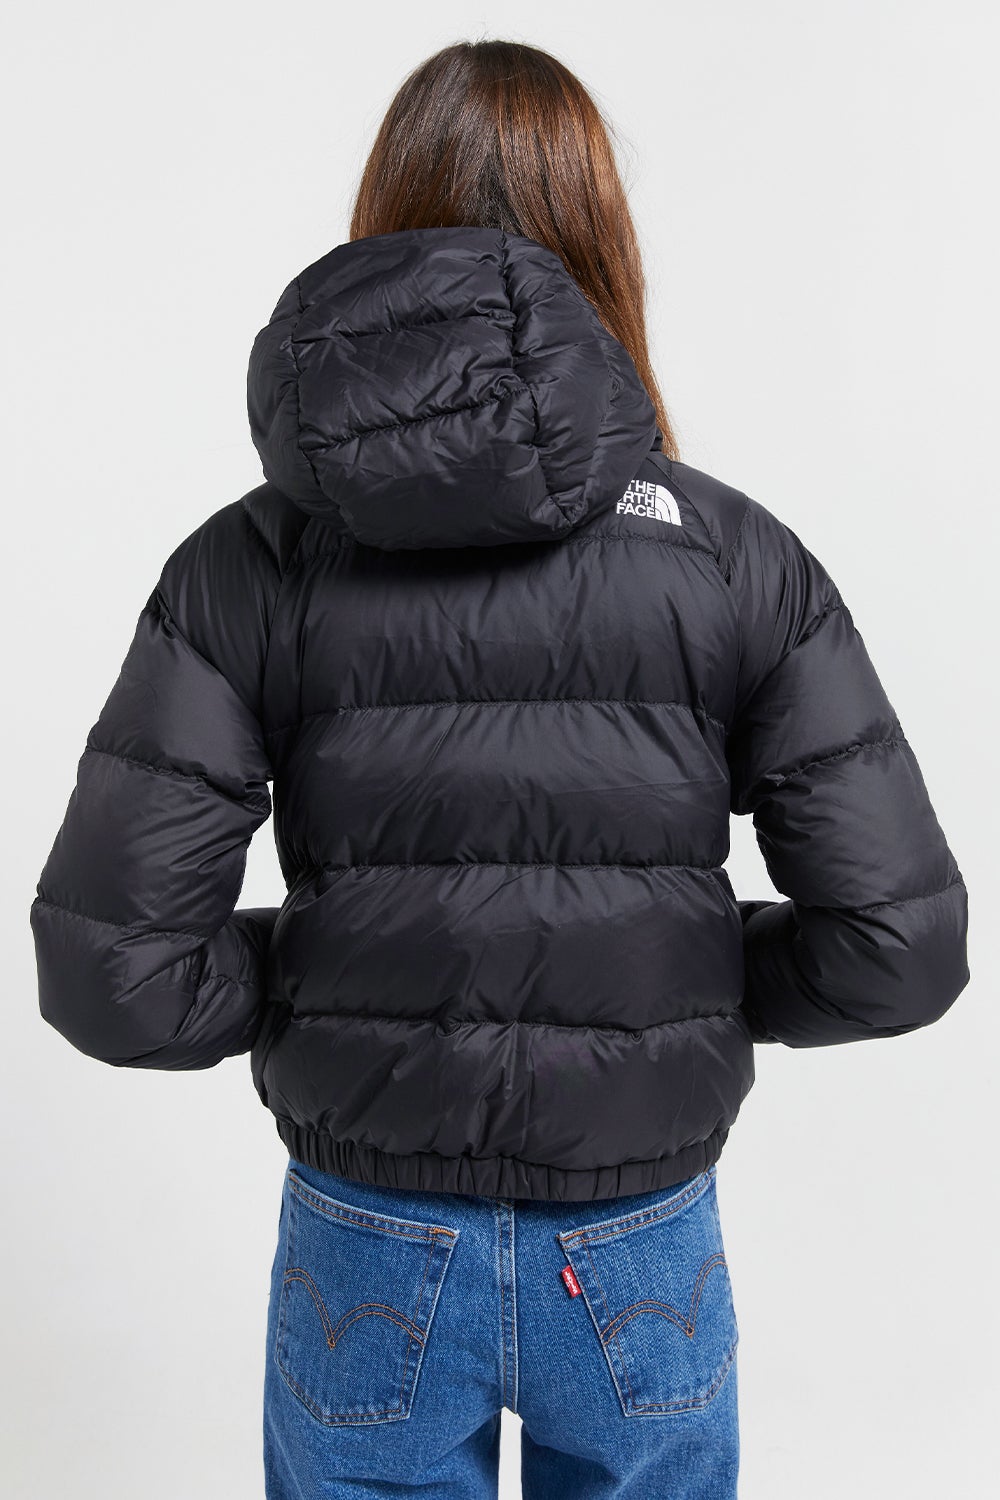 The North Face Hydrenalite Down Hoodie Black